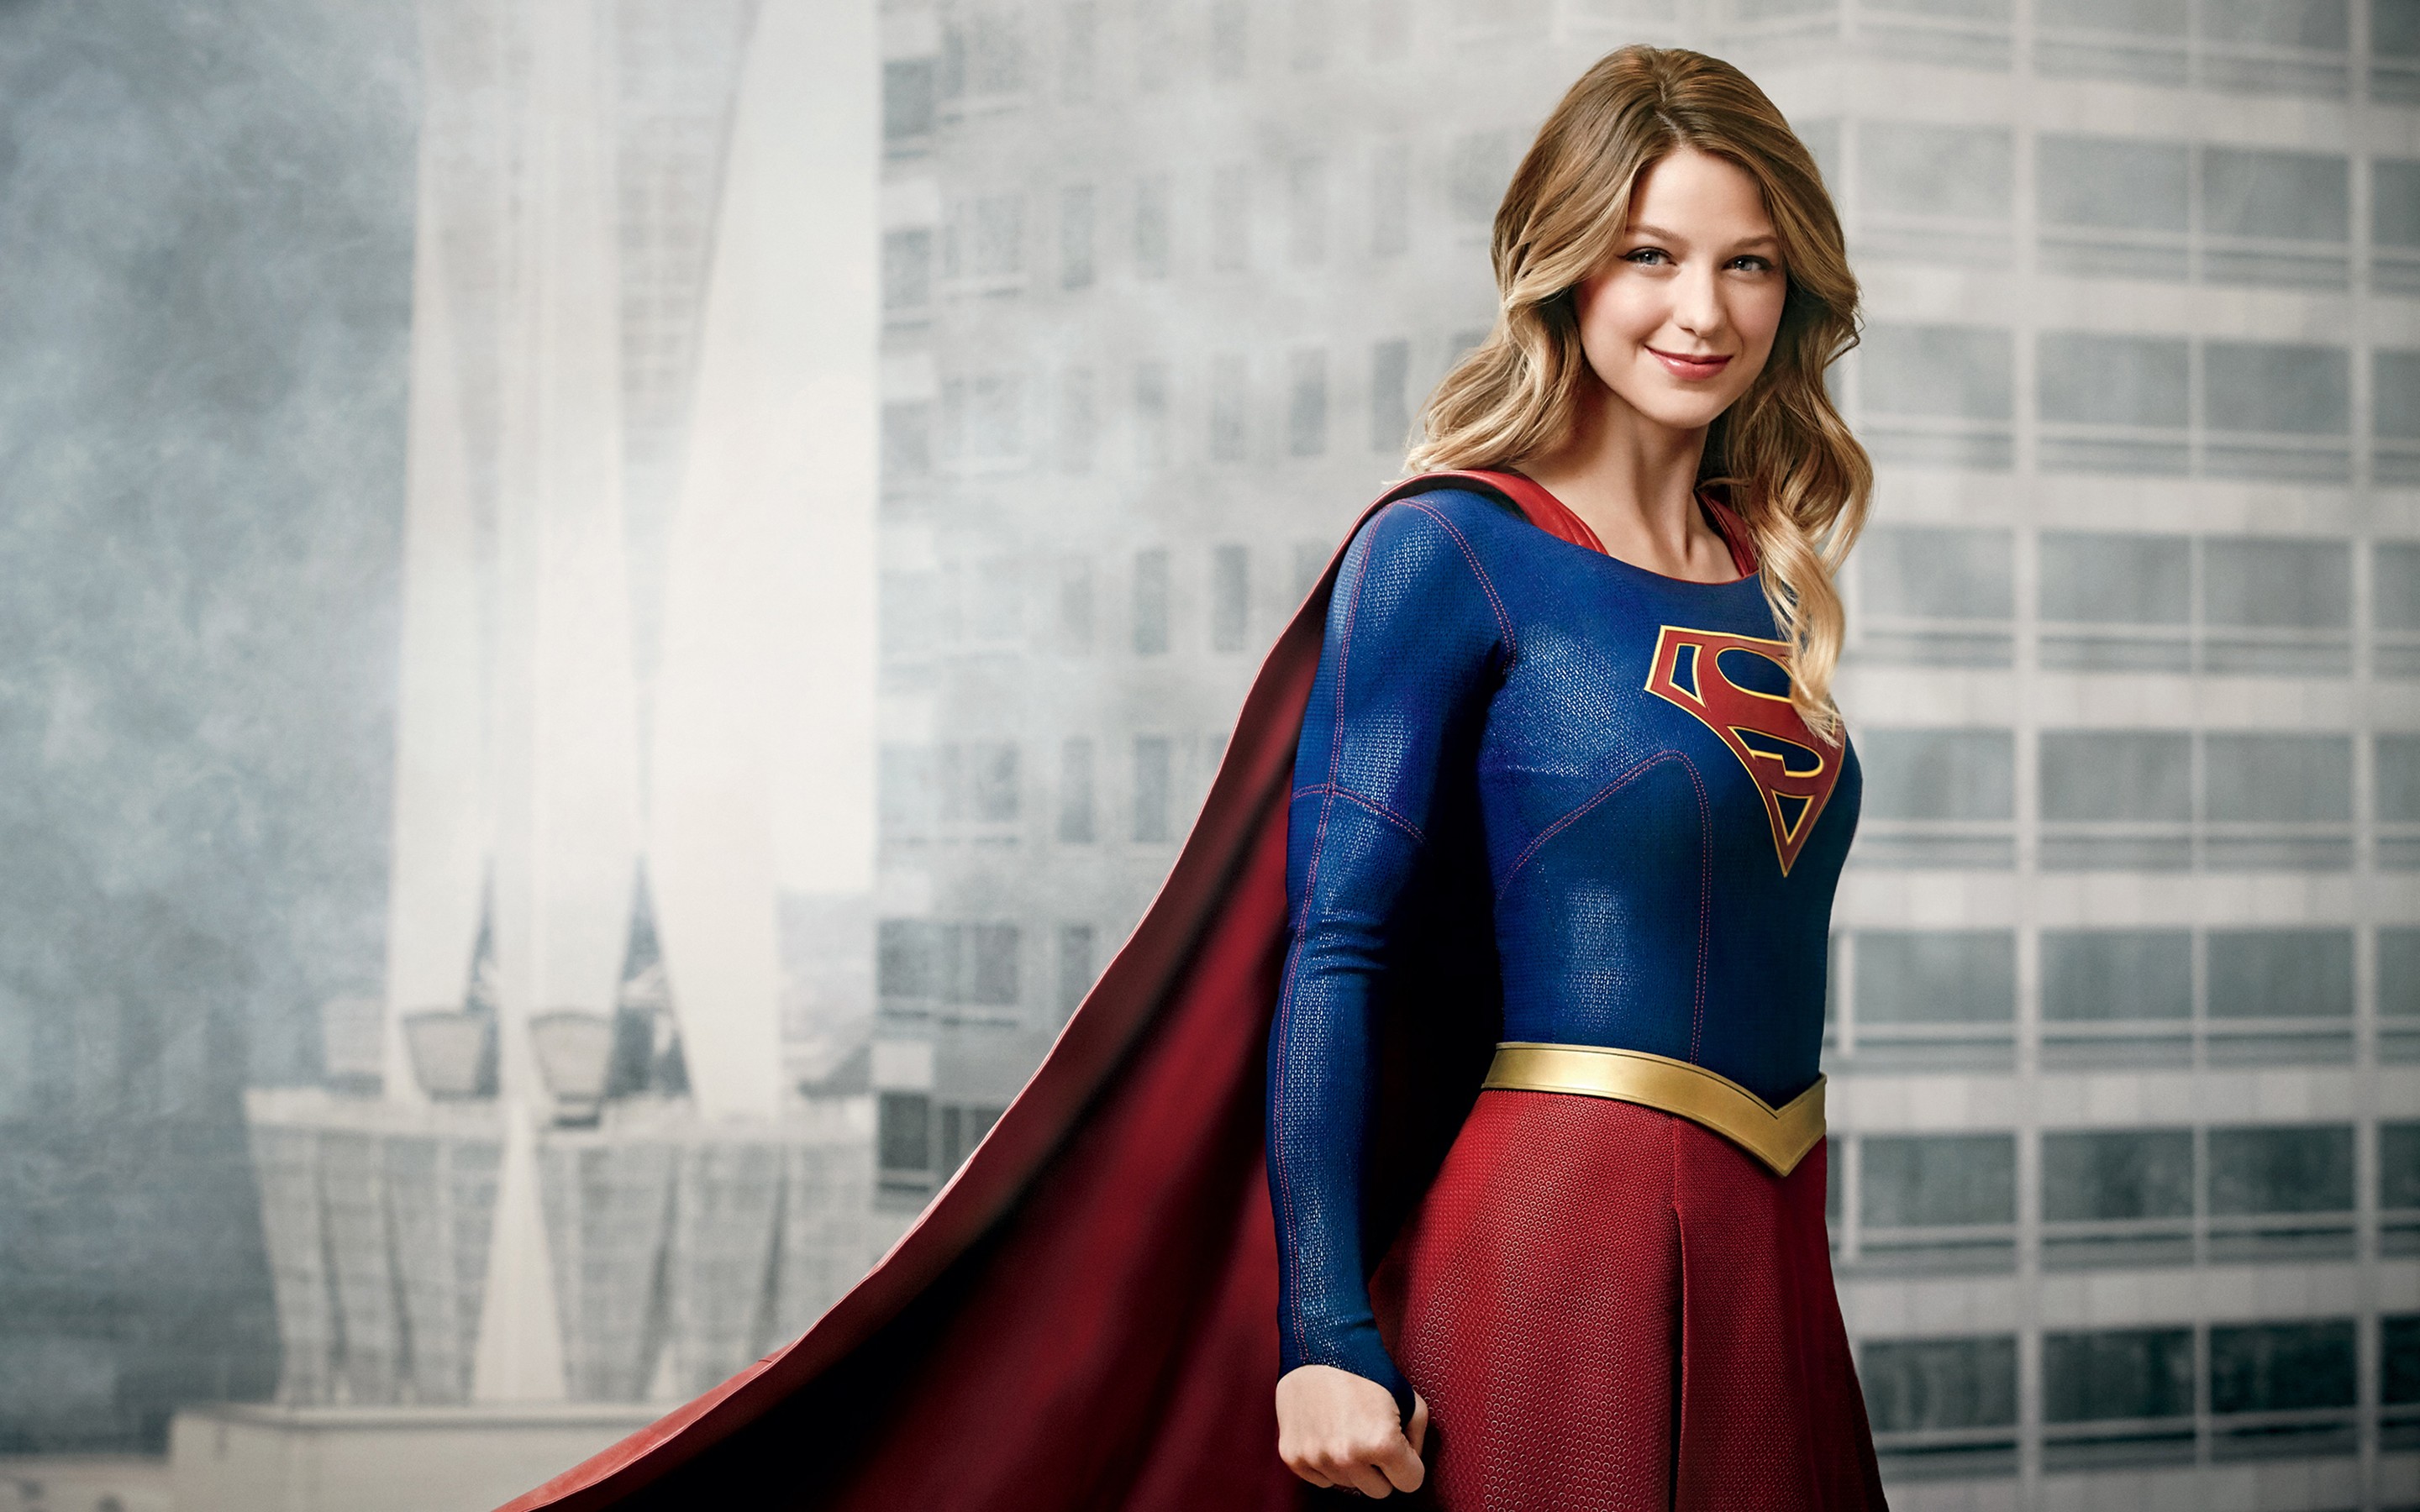 Supergirl Wallpapers and Backgrounds - WallpaperCG